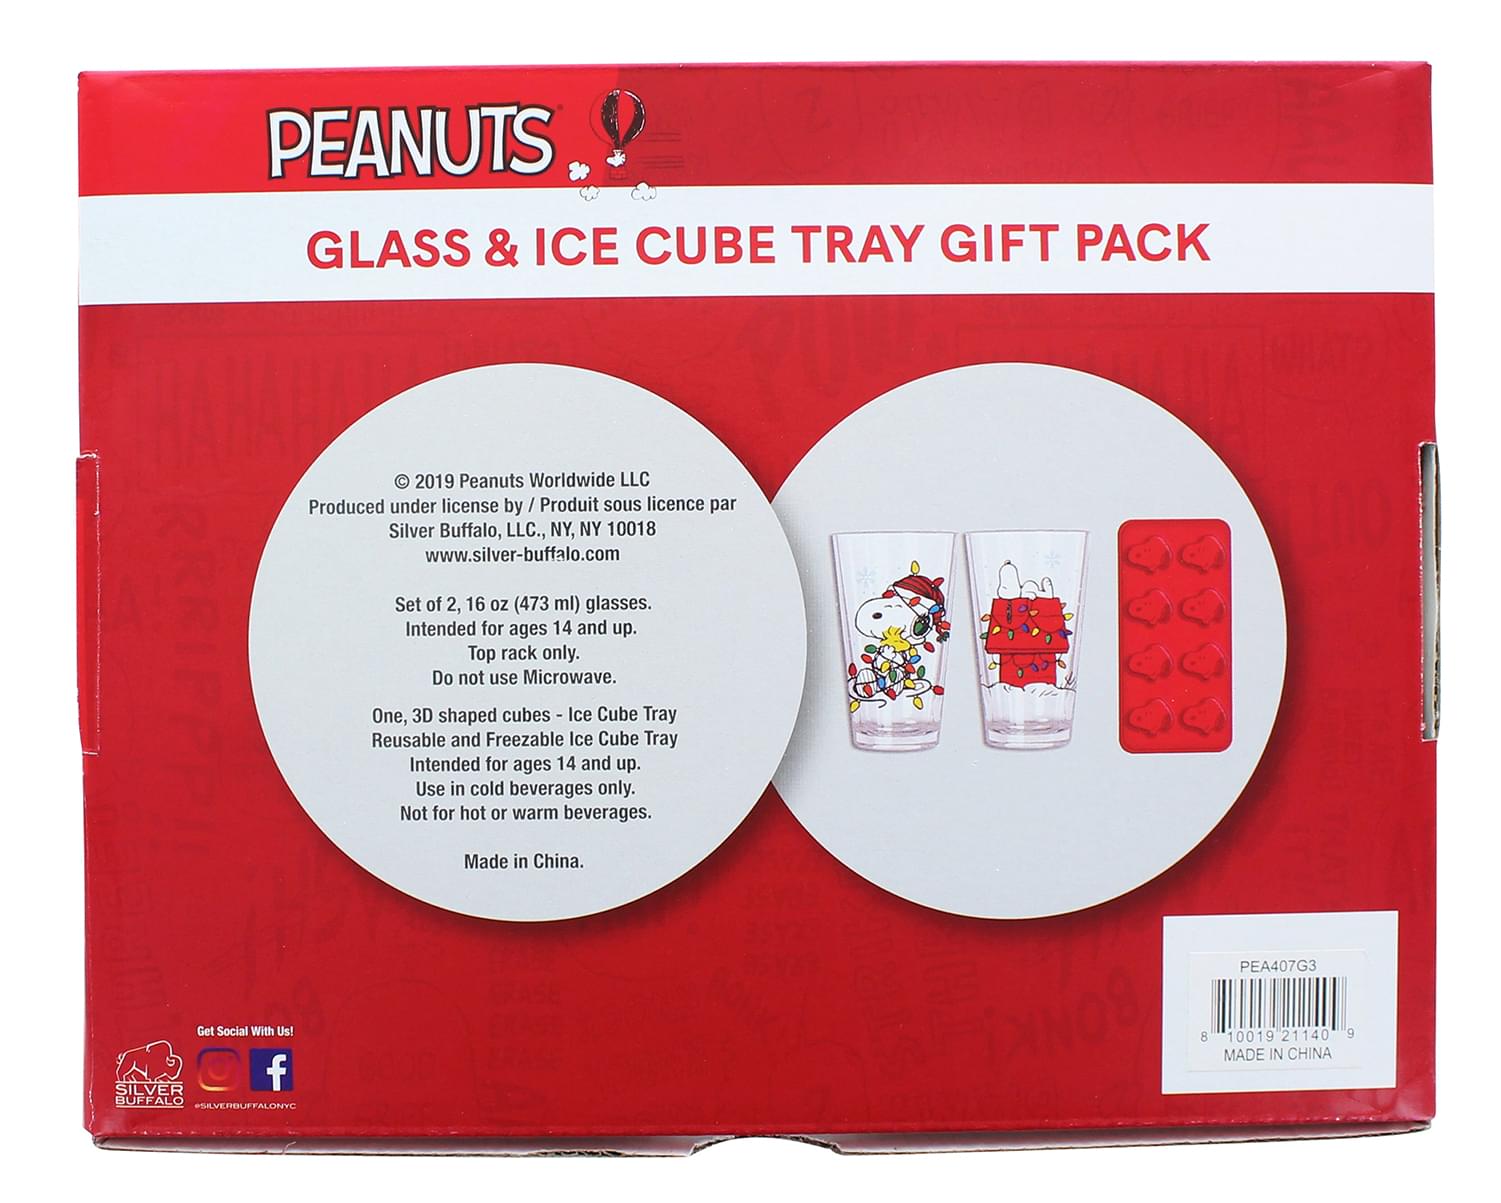 Peanuts Holiday Snoopy 16oz Pint Glasses with Ice Tray Set